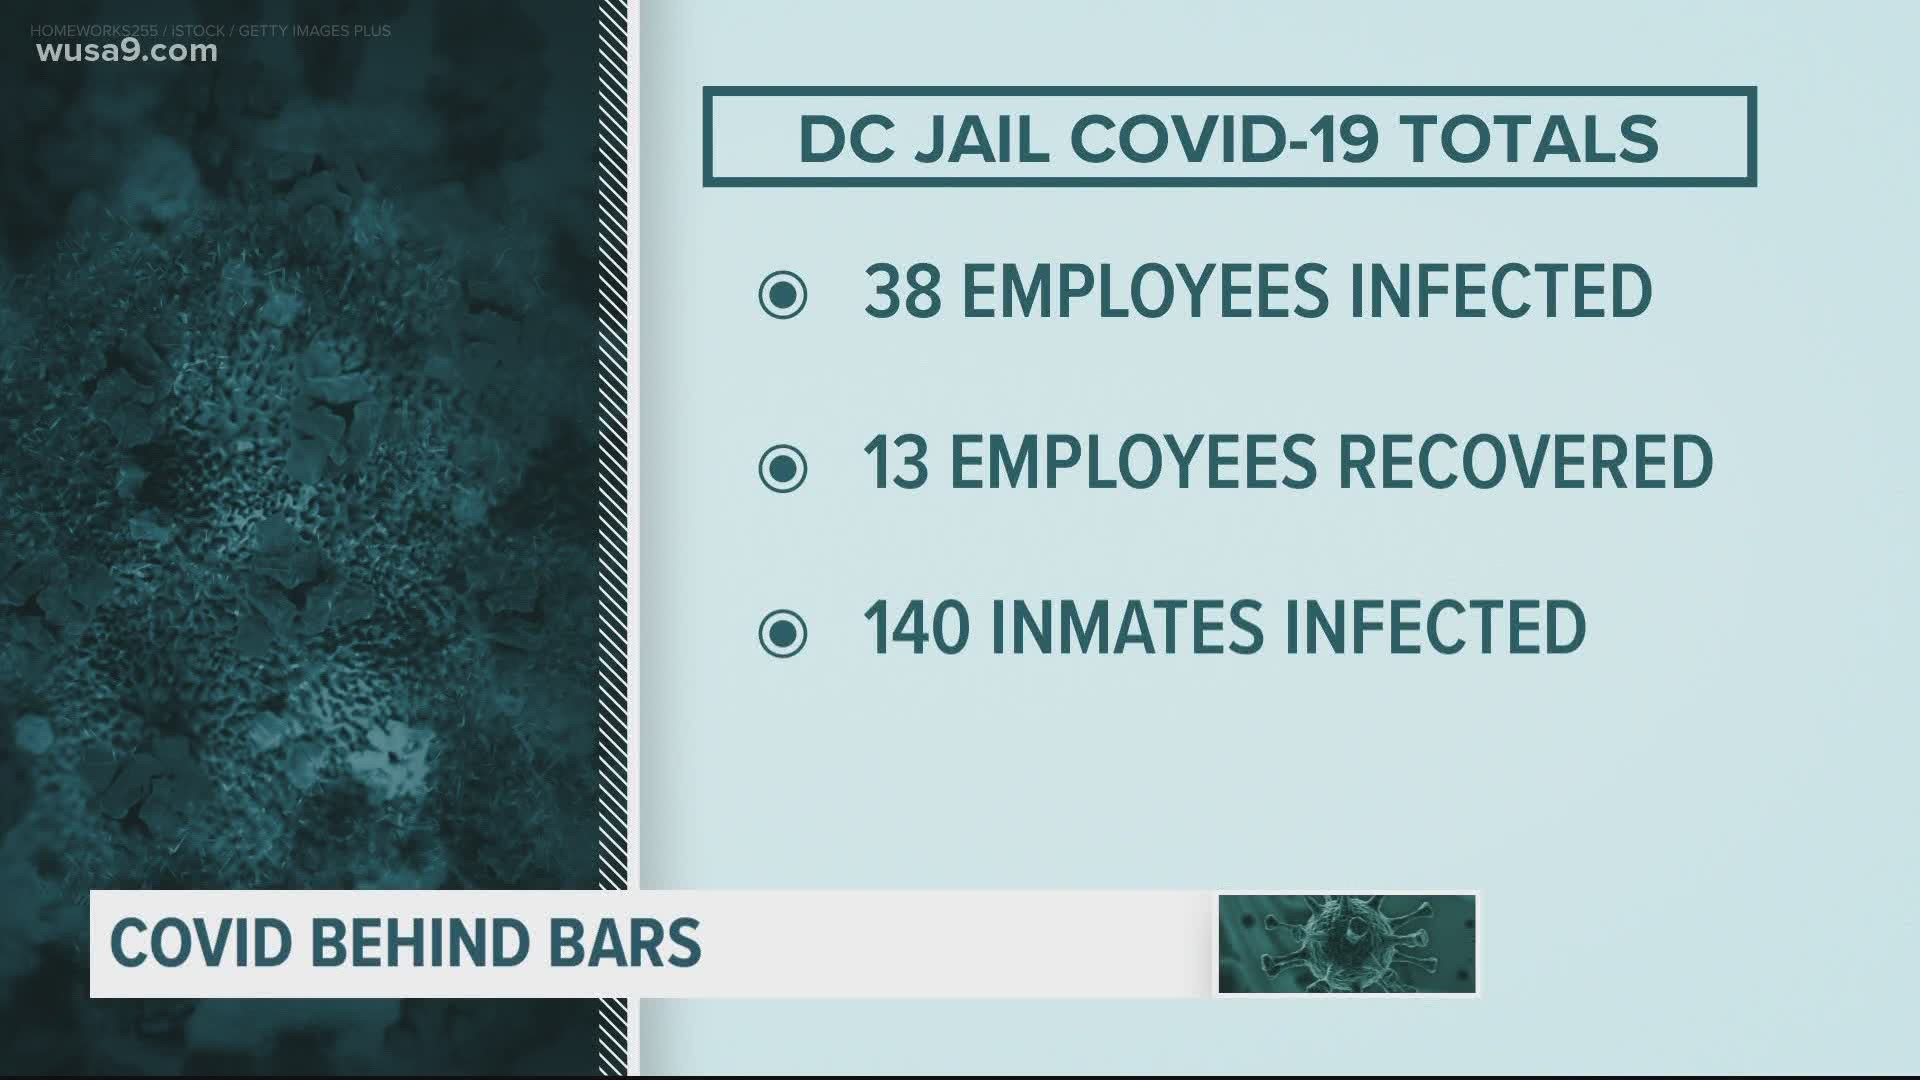 COVID-19 outbreak in DC Jail continues despite federal court order.